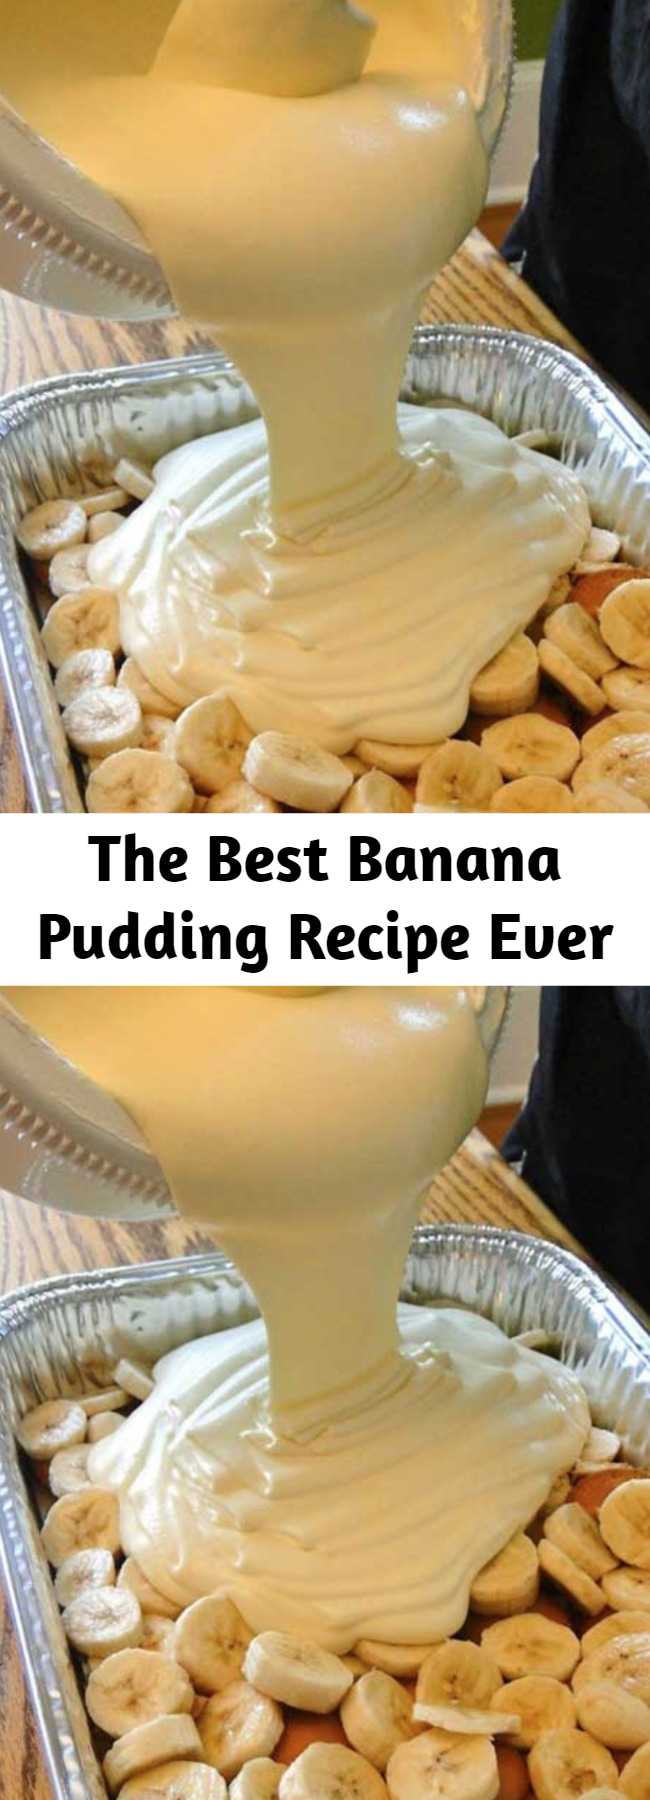 The Best Banana Pudding Recipe Ever - This recipe makes the best banana pudding I have ever tasted. And I’ll bet it’s the best banana pudding you’ve ever tasted, too.